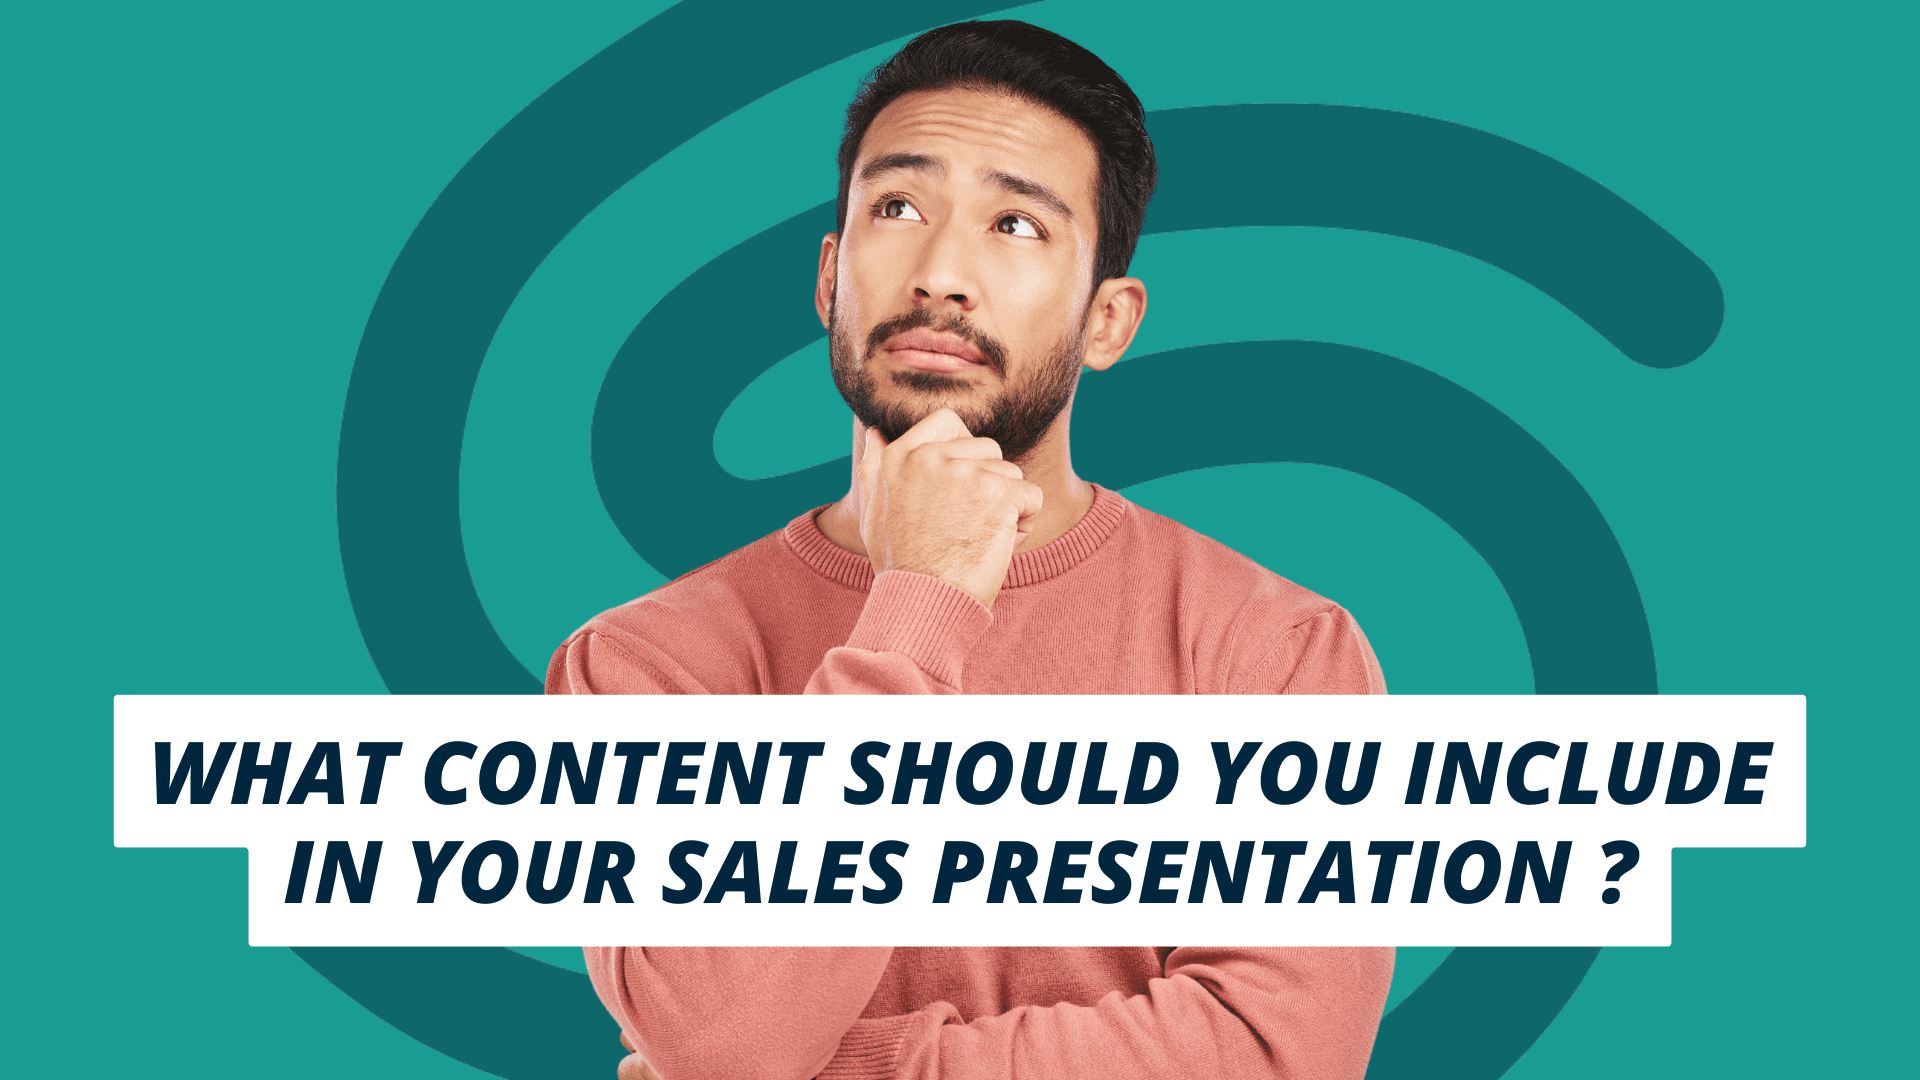 What content should you include in your sales presentation?